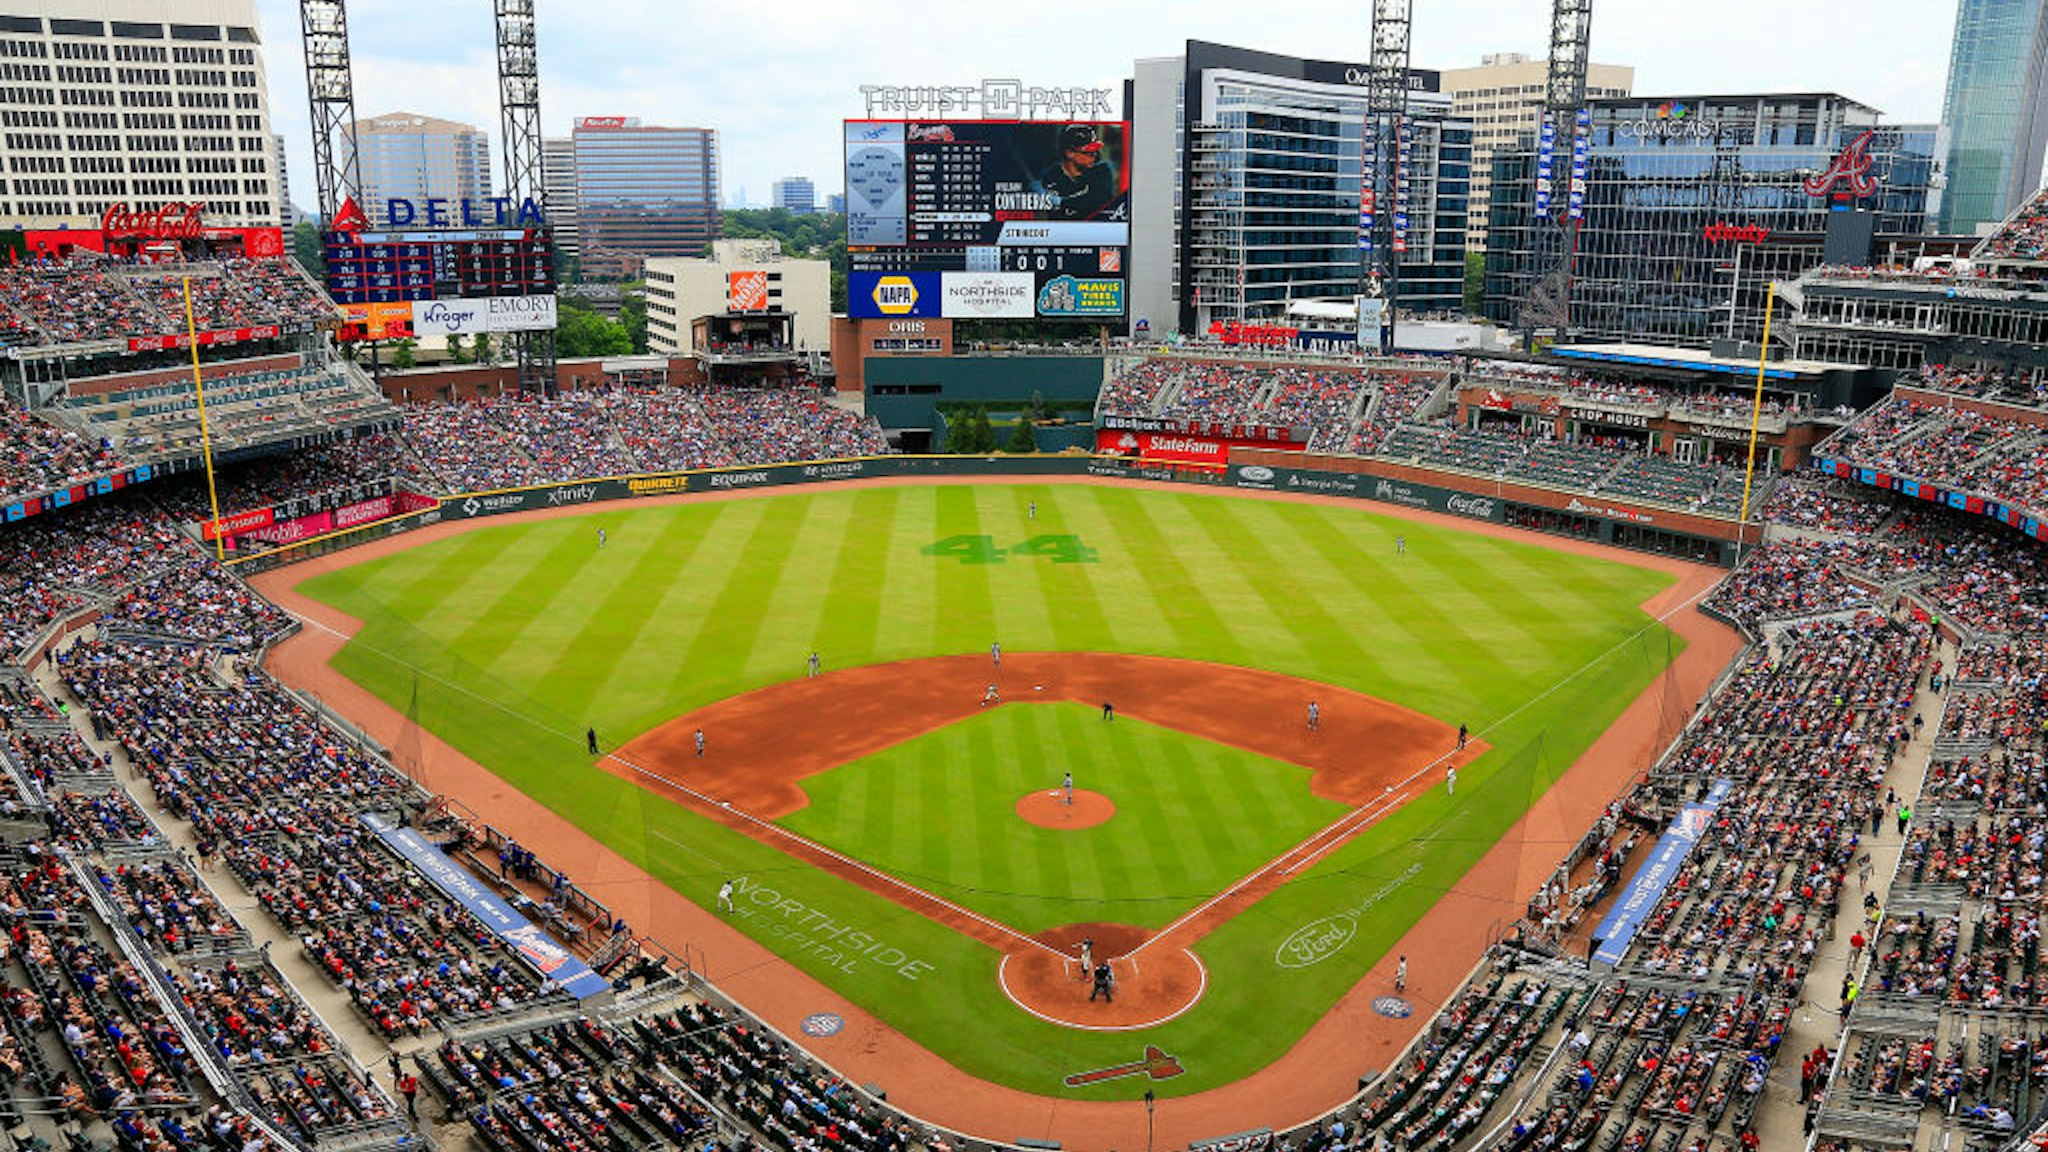 ATLANTA, GA - JUNE 06: An overview of the stadium and field during the Sunday afternoon MLB game between the Atlanta Braves and the Los Angeles Dodgers on June 6, 2021 at Truist Park in Atlanta, Georgia. (Photo by David J. Griffin/Icon Sportswire via Getty Images)